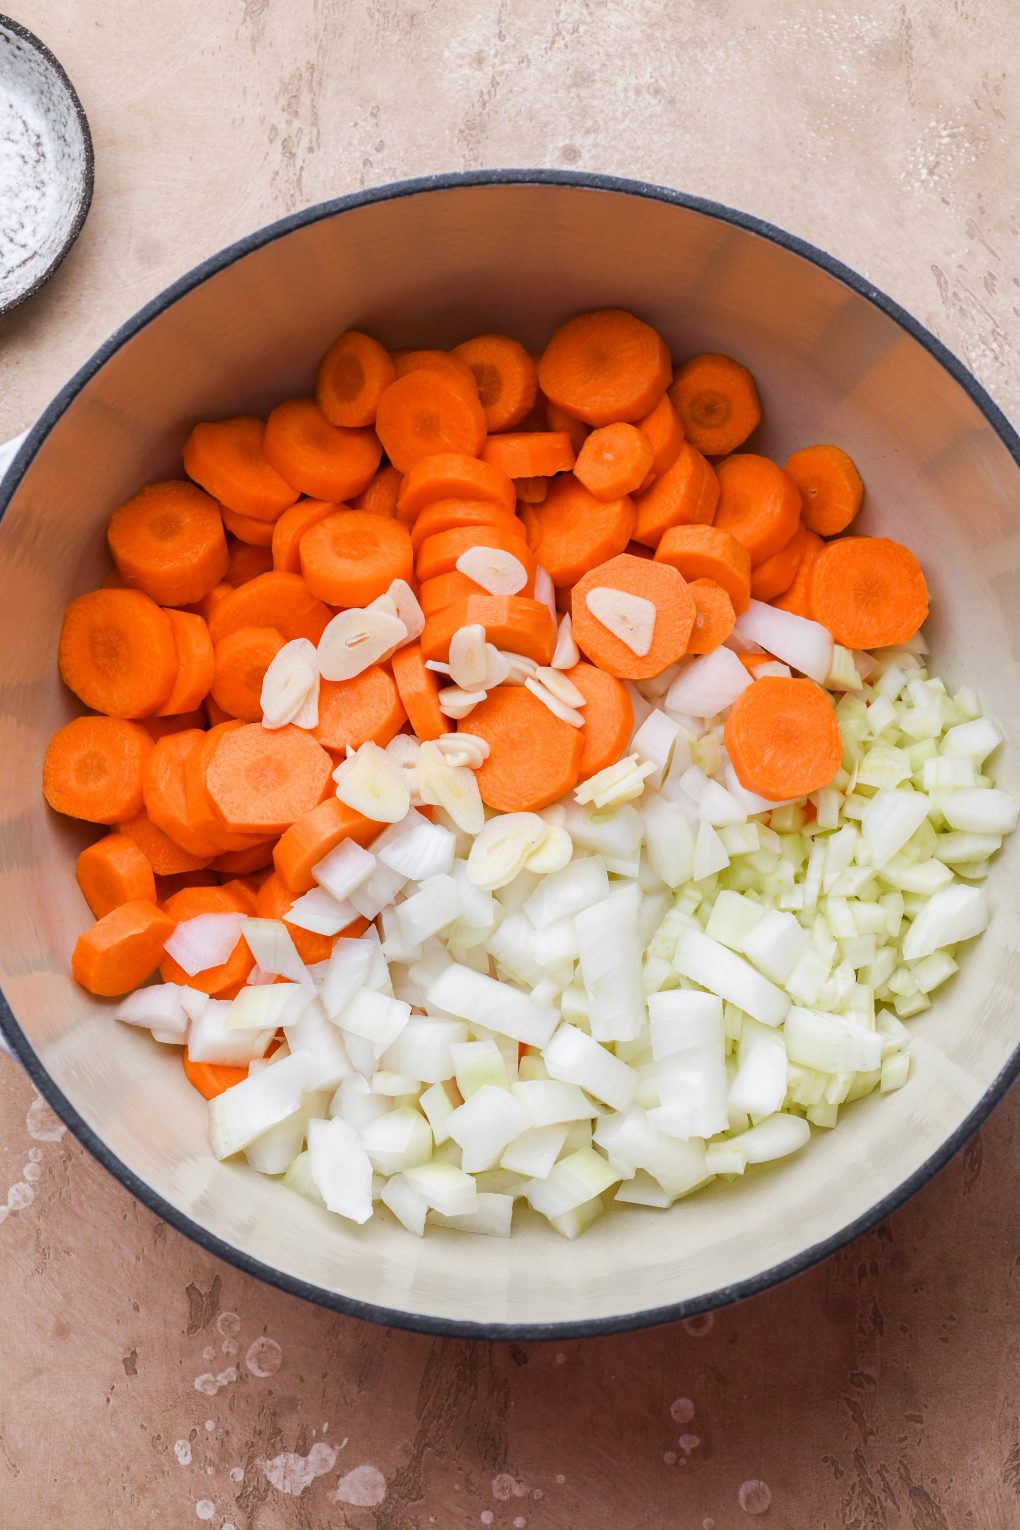 Chopped carrots, onions, fennel, and garlic in a large white ceramic soup pot. On a light brown background.